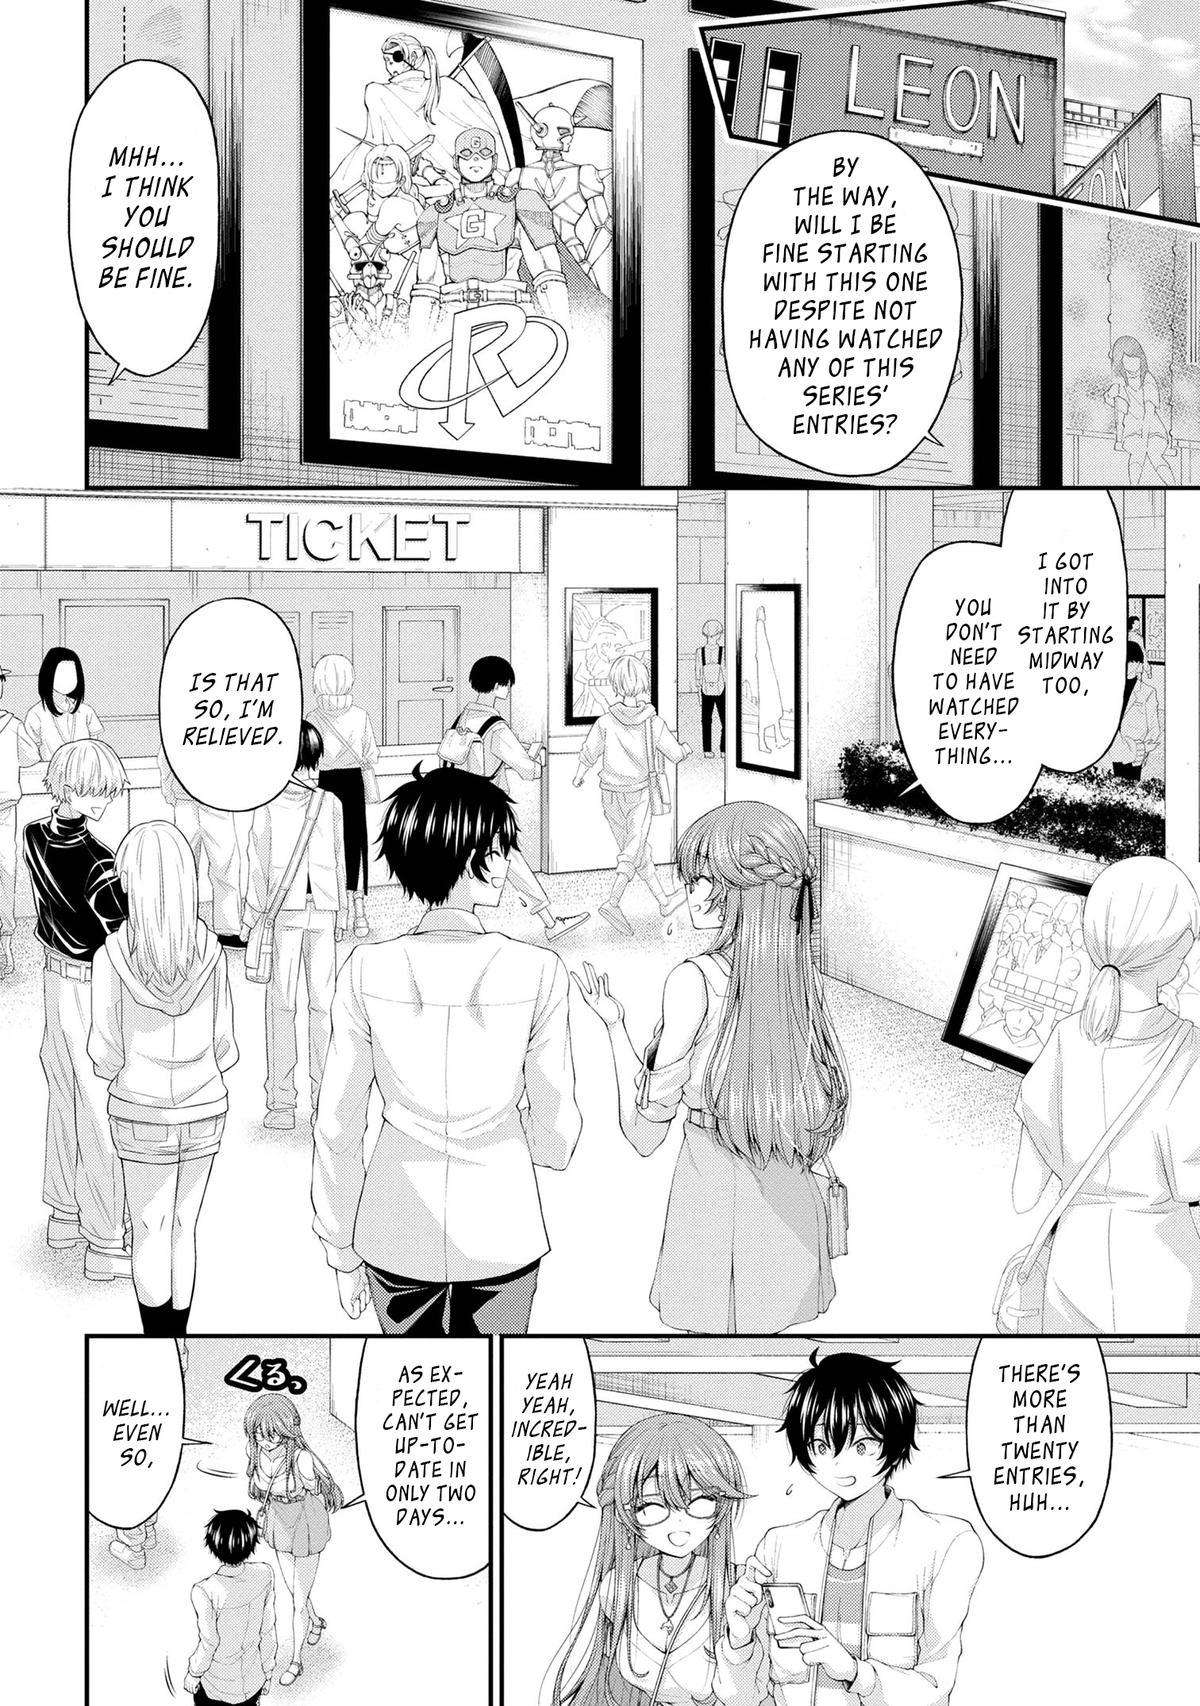 The Gal Who Was Meant to Confess to Me as a Game Punishment - chapter 10 - #4